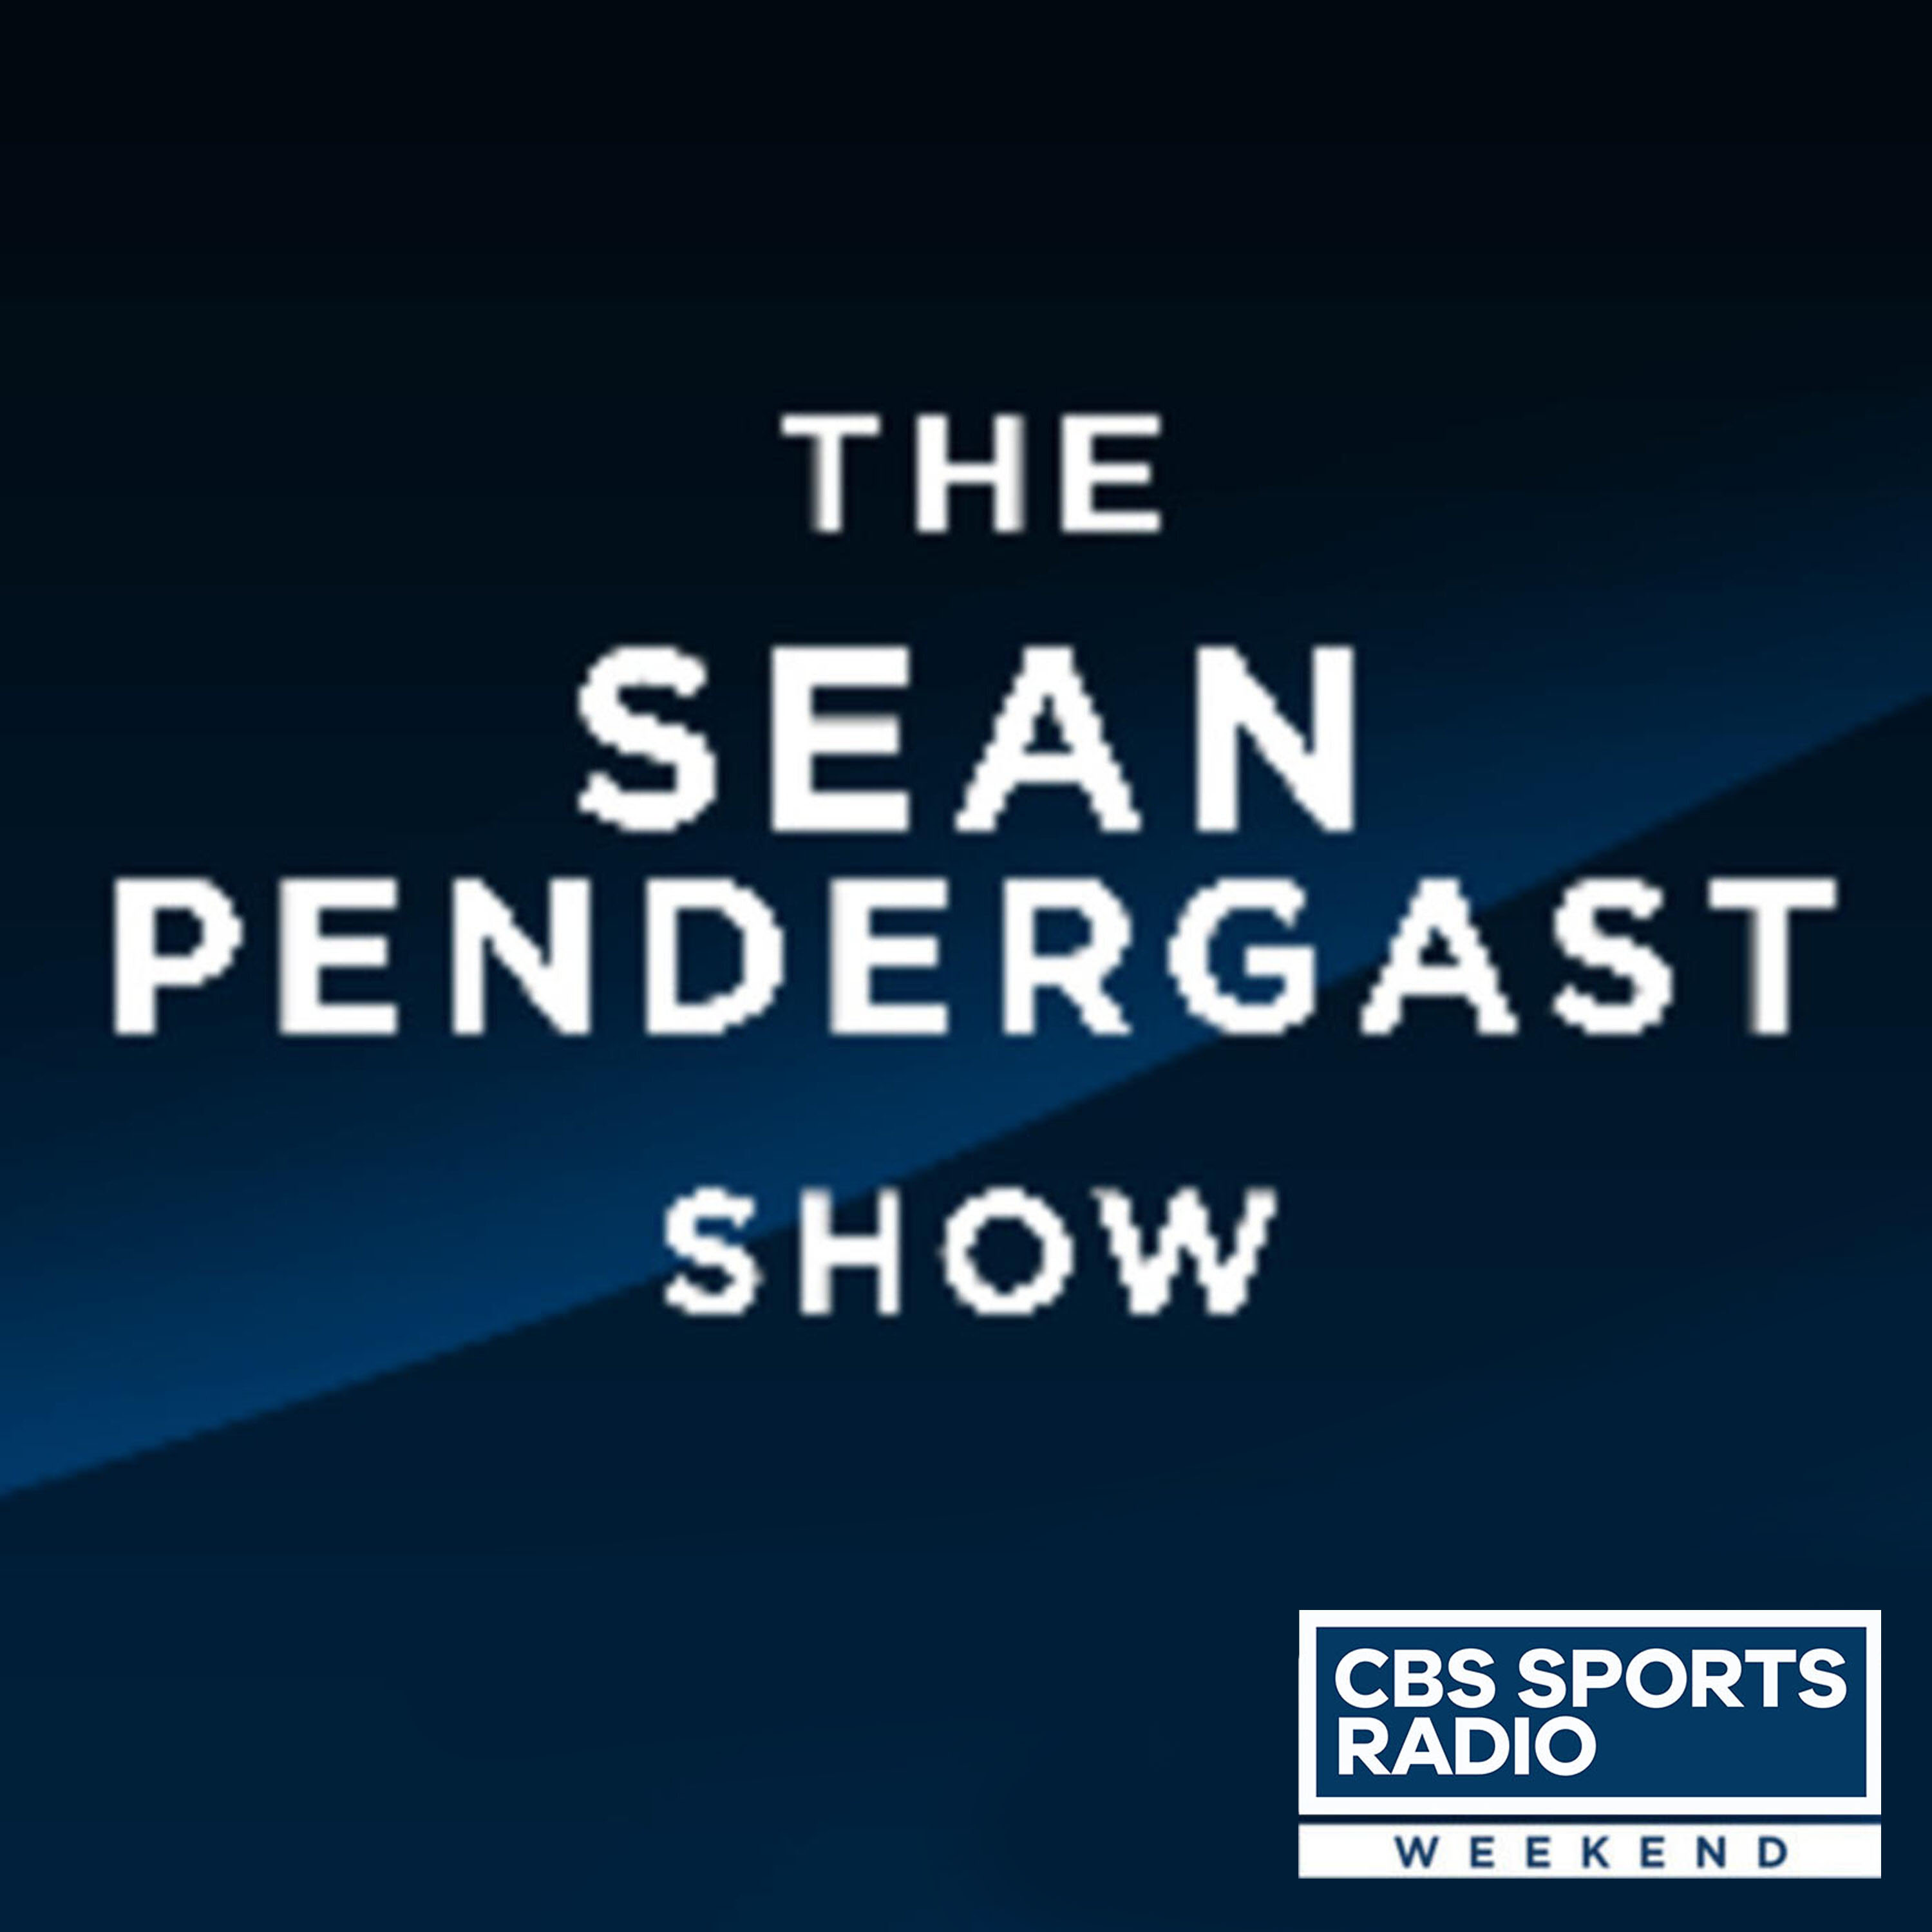 The Sean Pendergast Show - Jerry Palm, CBS Sports